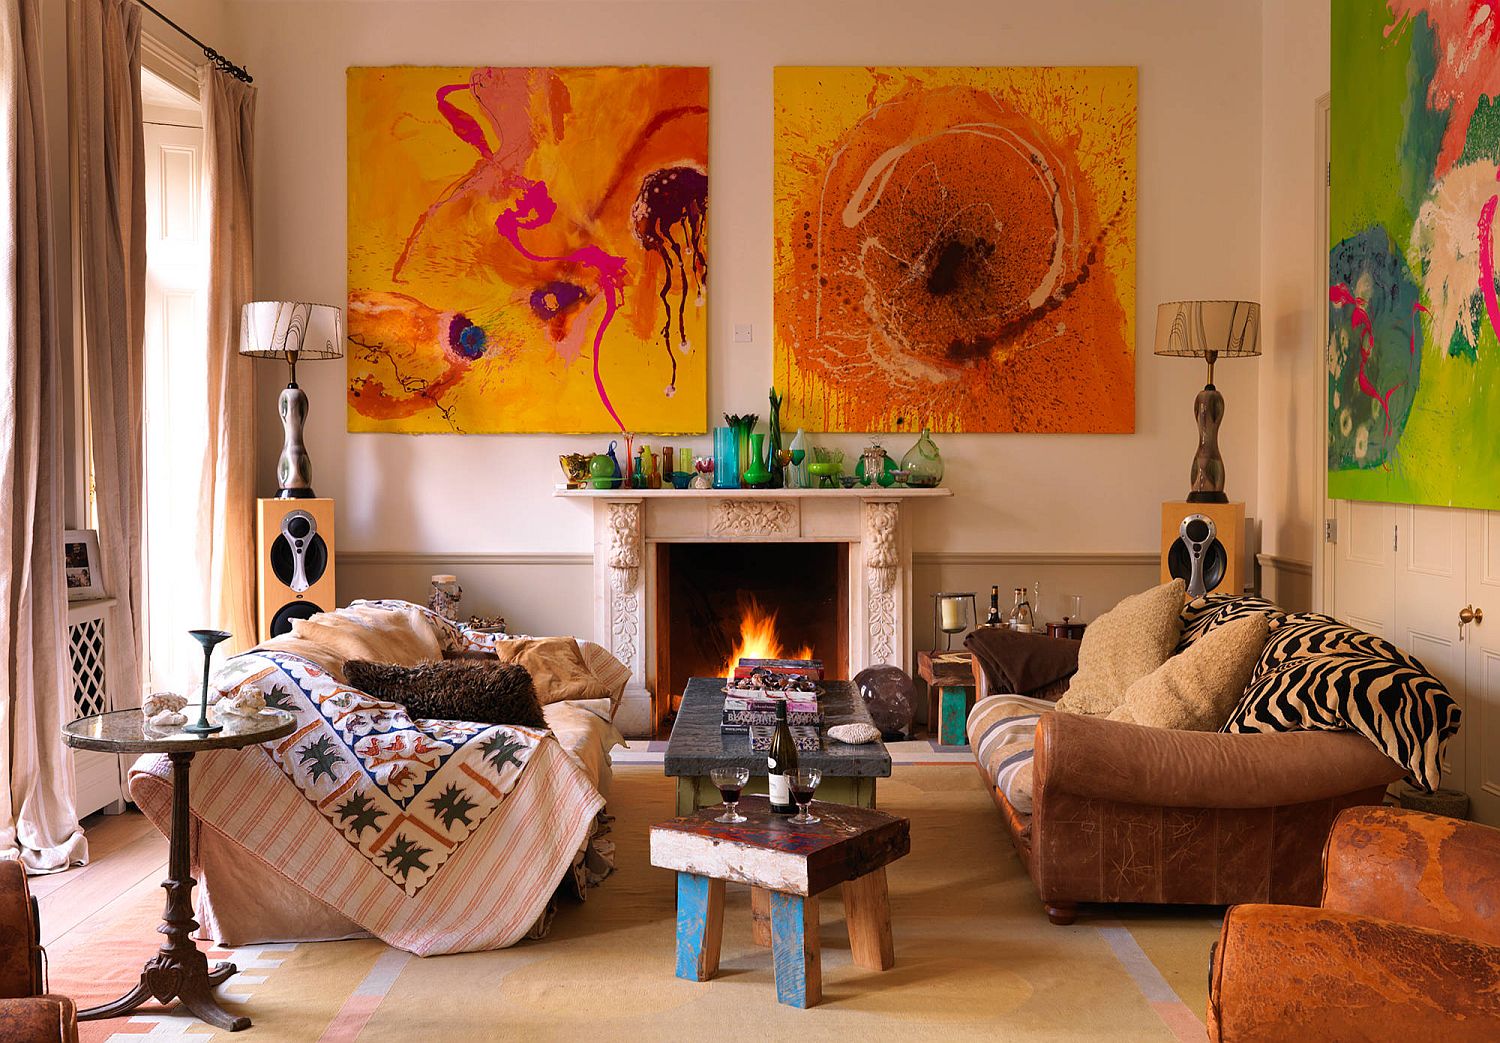 Blend of fabrics, bright wall art and a cozy fireplace come together to create this fabulous living space